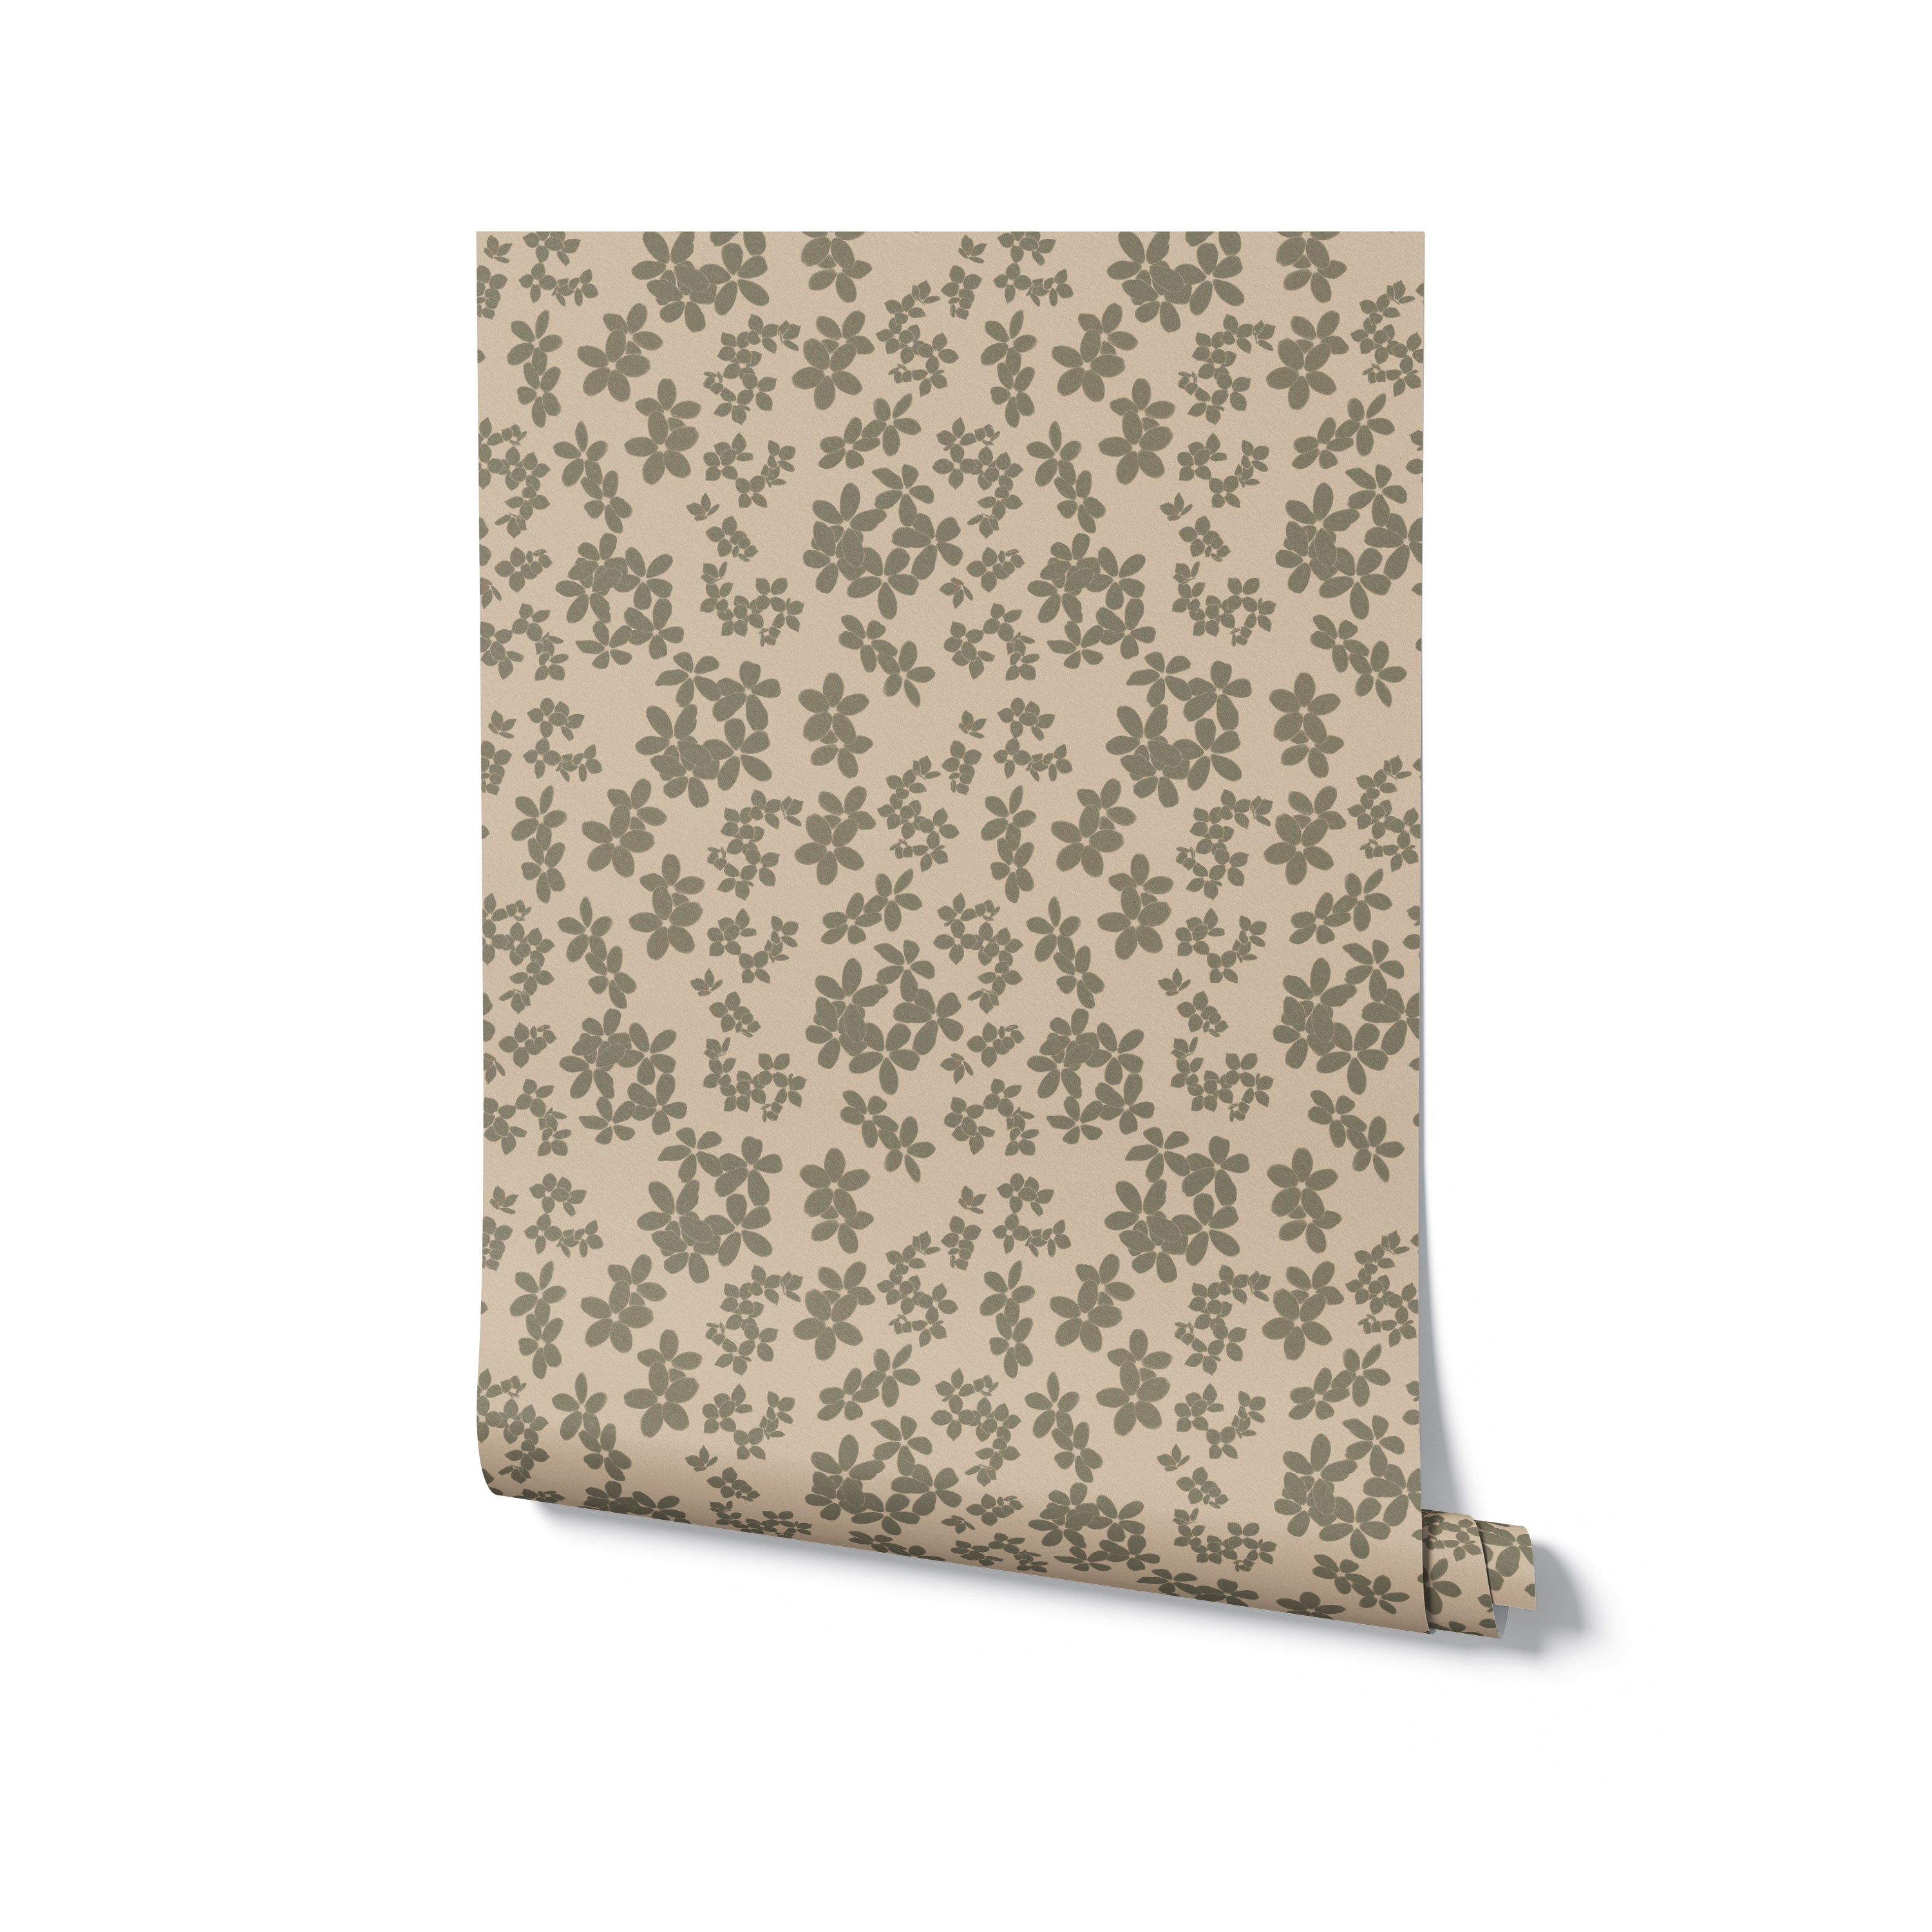 A roll of the Little Flowers Wallpaper showcasing the petite and evenly spaced green floral pattern. This image highlights the wallpaper's consistency and the gentle, earthy tones that make it ideal for creating a serene and cozy environment in residential spaces.